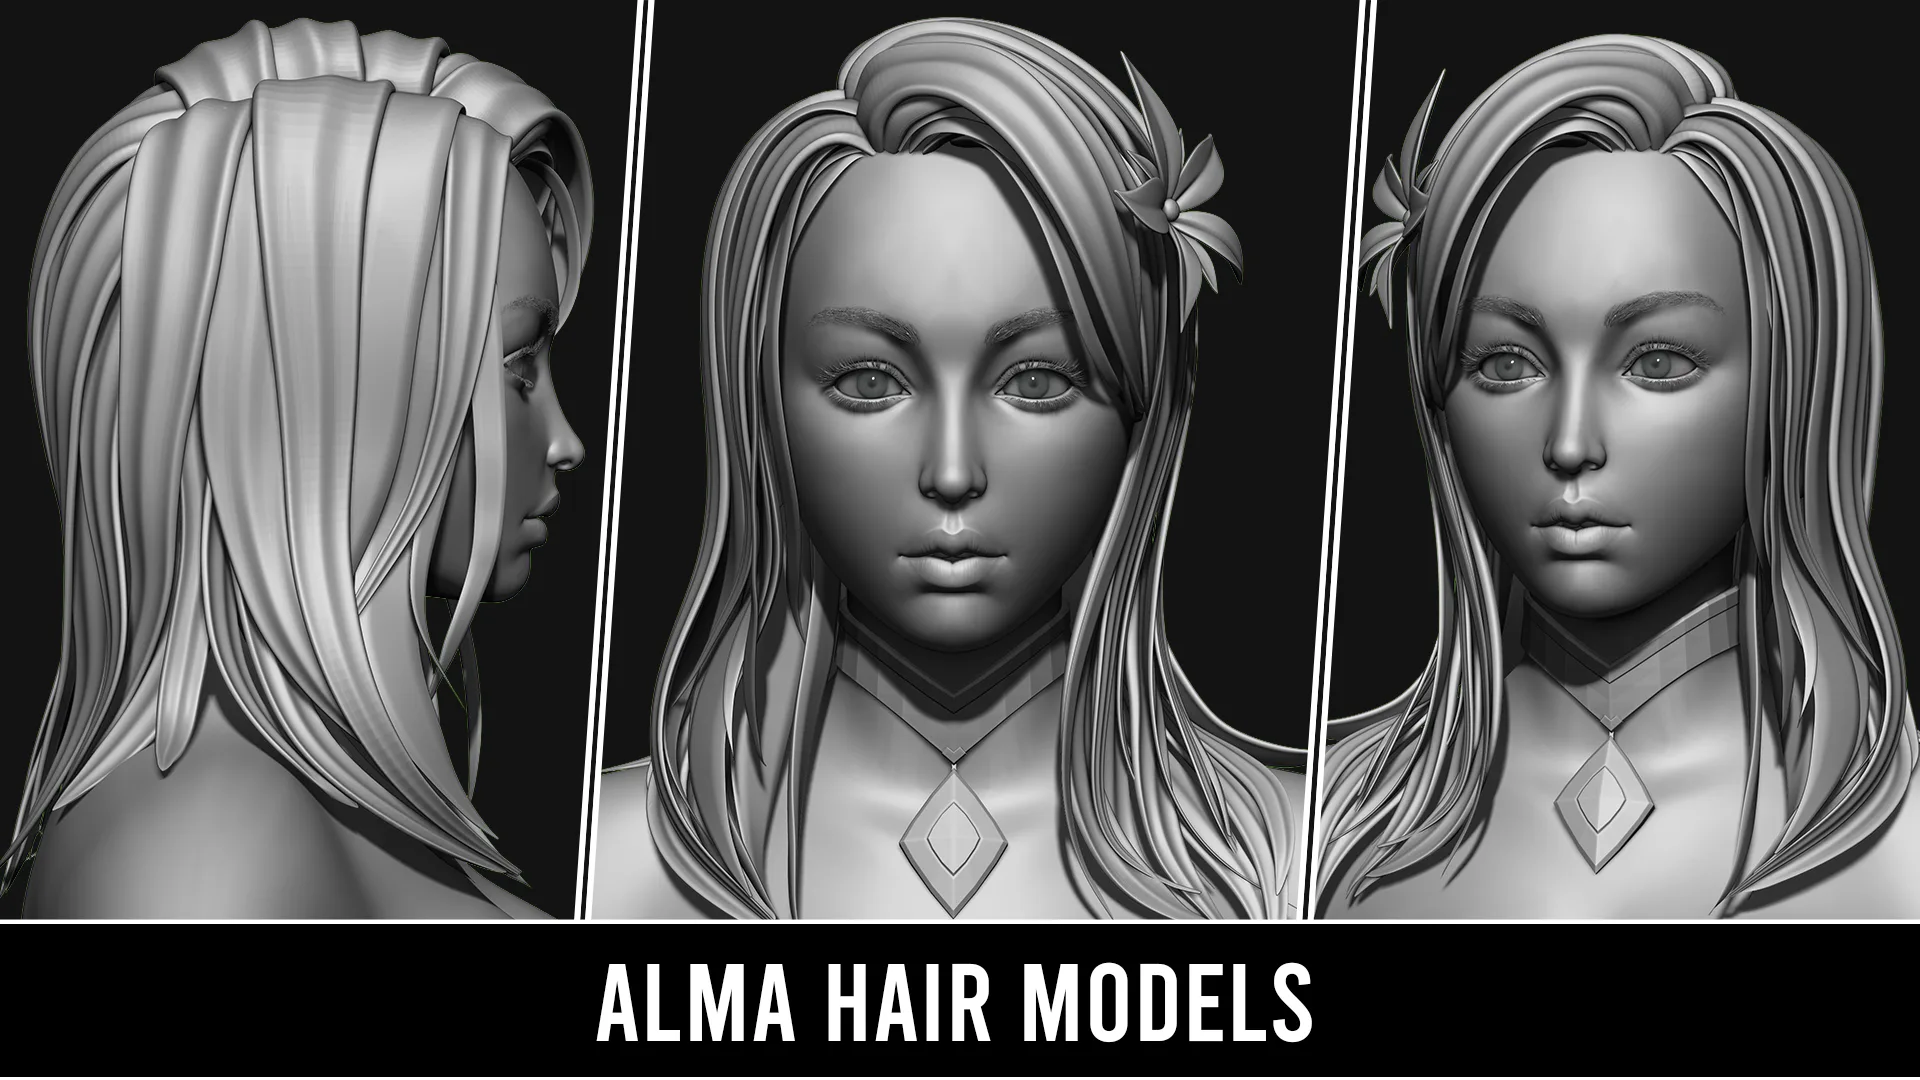 29 Hair Models | Quad Topology + UV's | With Accessories